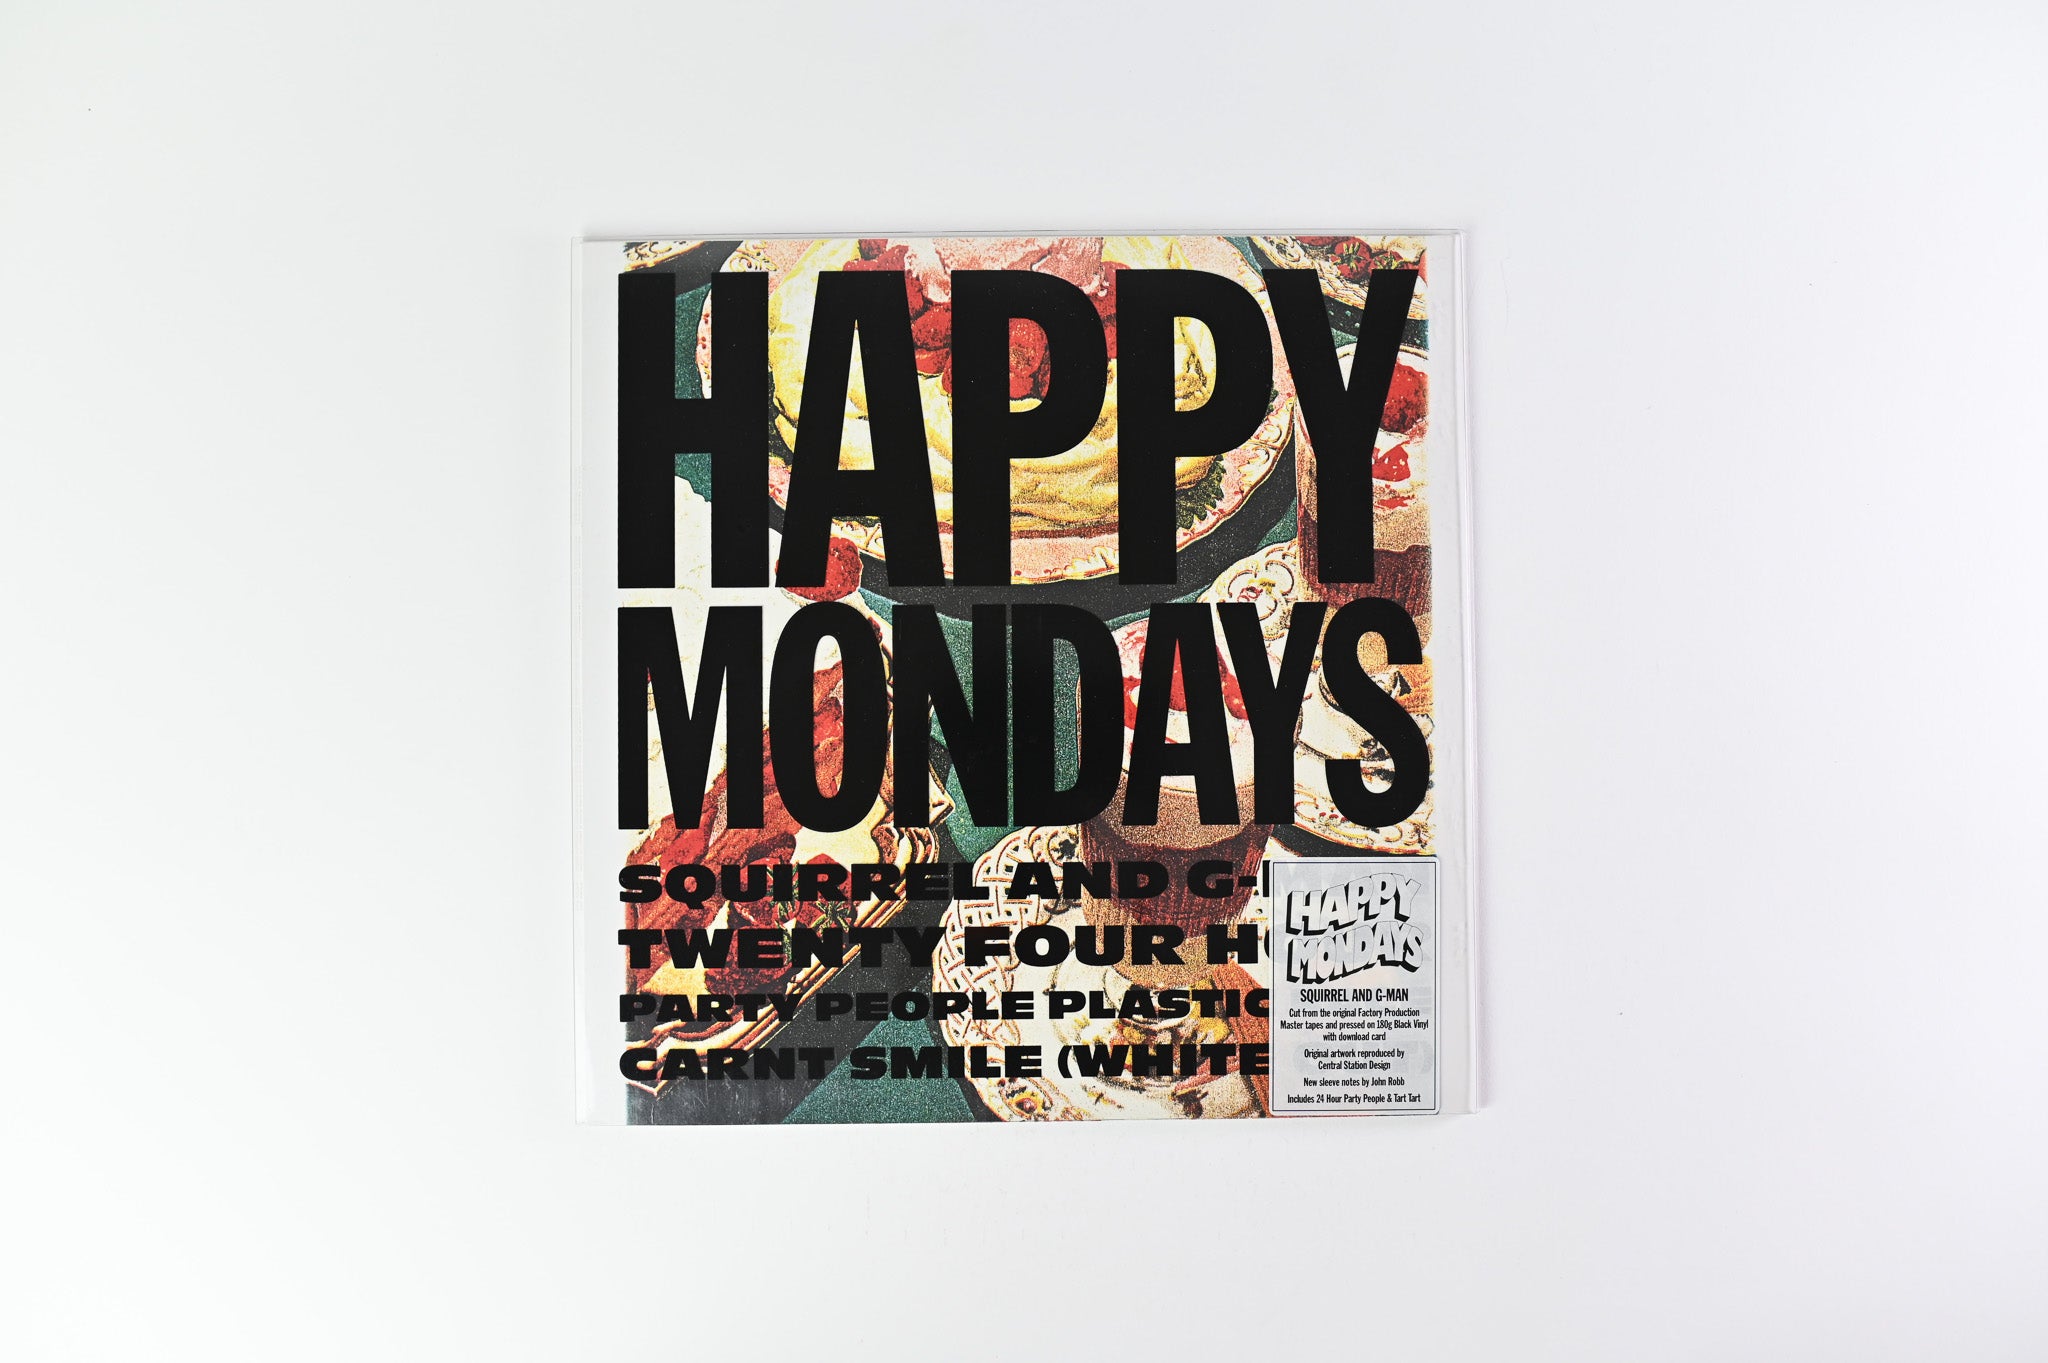 Happy Mondays - Squirrel And G-Man Twenty Four Hour Party People Plastic Face Carnt Smile (White Out) on London Reissue